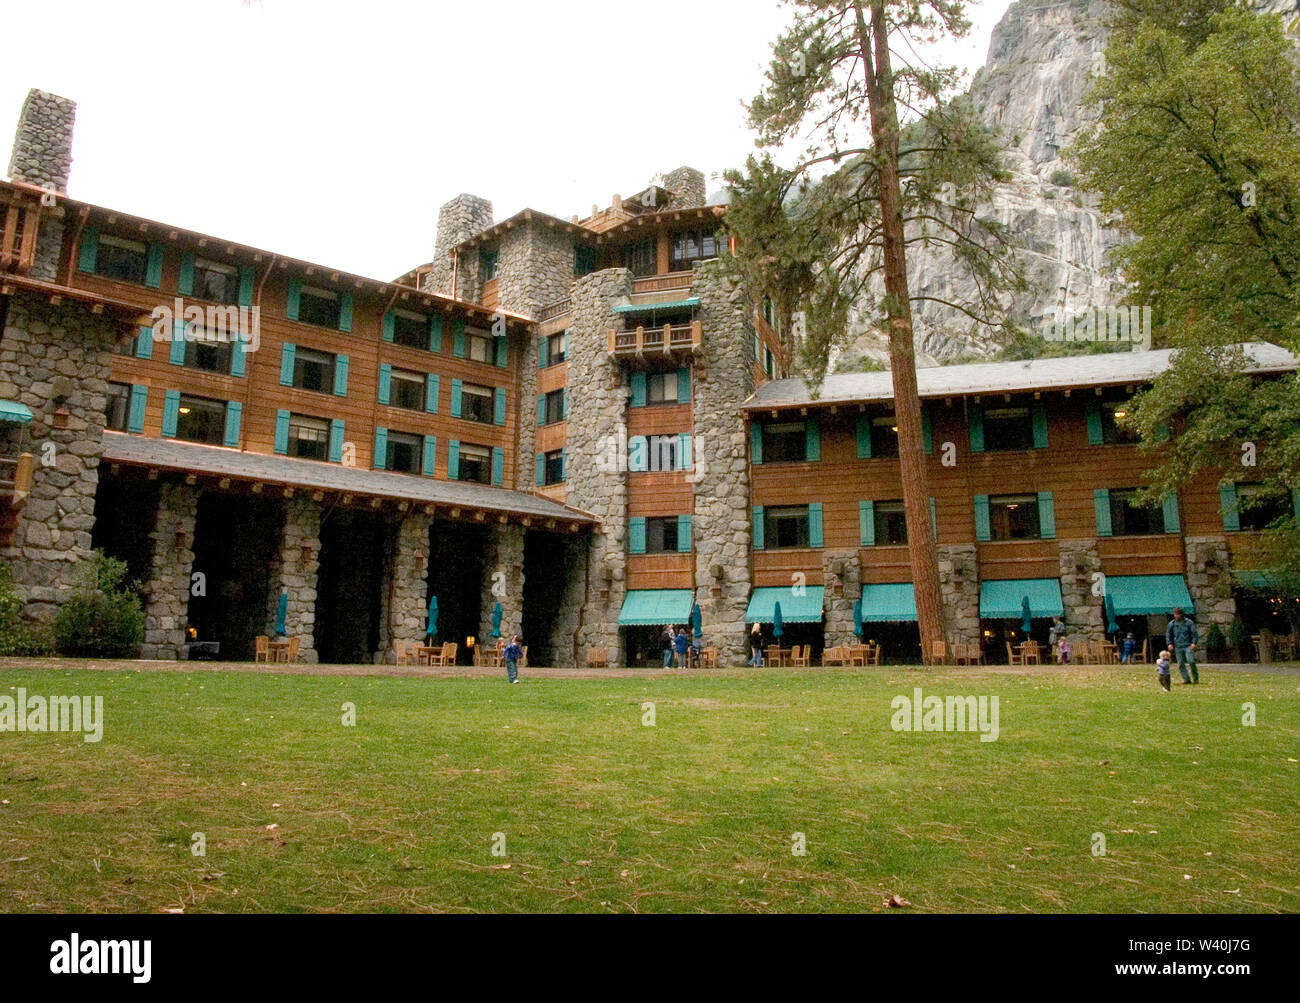 July 18, 2019: In a $12 million settlement announced Monday, Yosemite National Park got the right to use the original names of some of its most iconic hotels and attractions. Delaware North had, during the decades that it held the contract as the Park's concessionaire, quietly trademarked many of Yosemite's most famous names, including the Ahwahnee Hotel, Curry Village, the Wawona Hotel, and Badger Pass ski Area. In reaction to the lawsuit, the state of California has passed the California Heritage Protection Act, a law that forbids park concessionaires from claiming or trademarking any of the Stock Photo